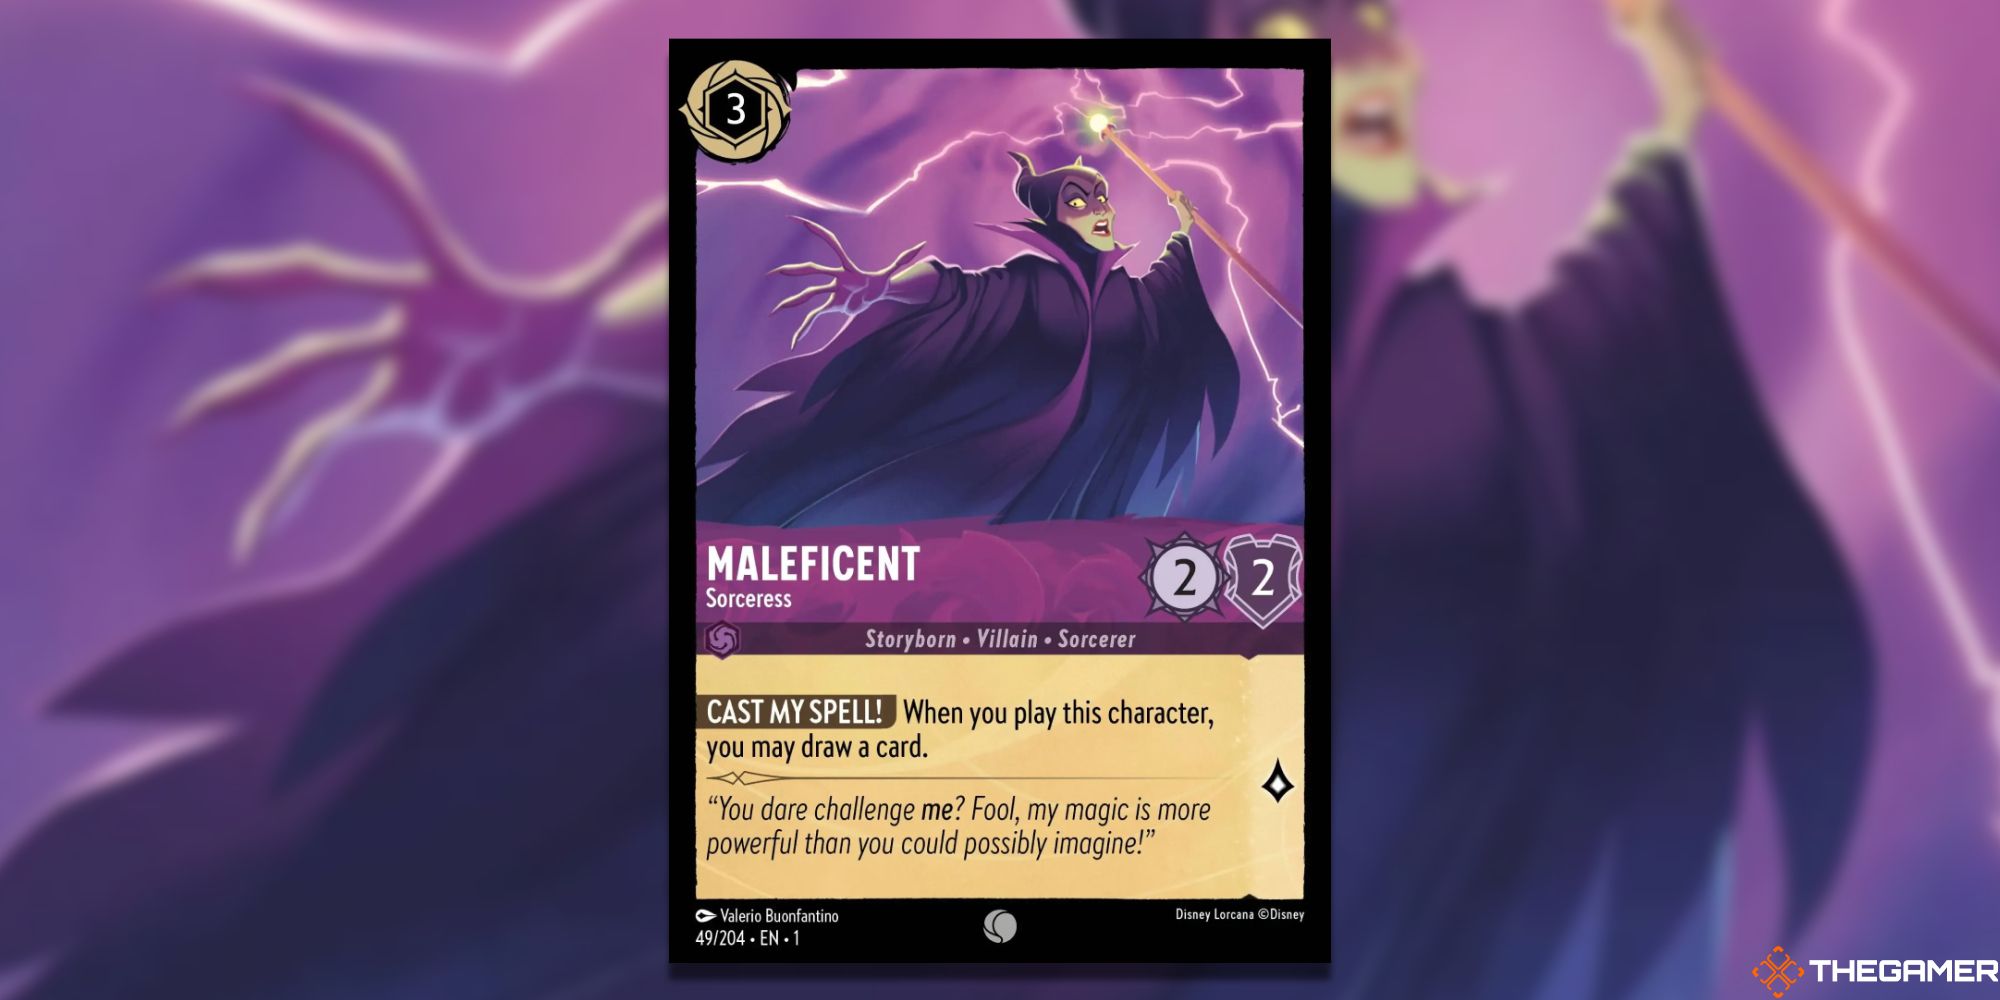 Image of the Maleficent, Sorceress card in Magic: The Gathering, with art by Valerio Buonfantino